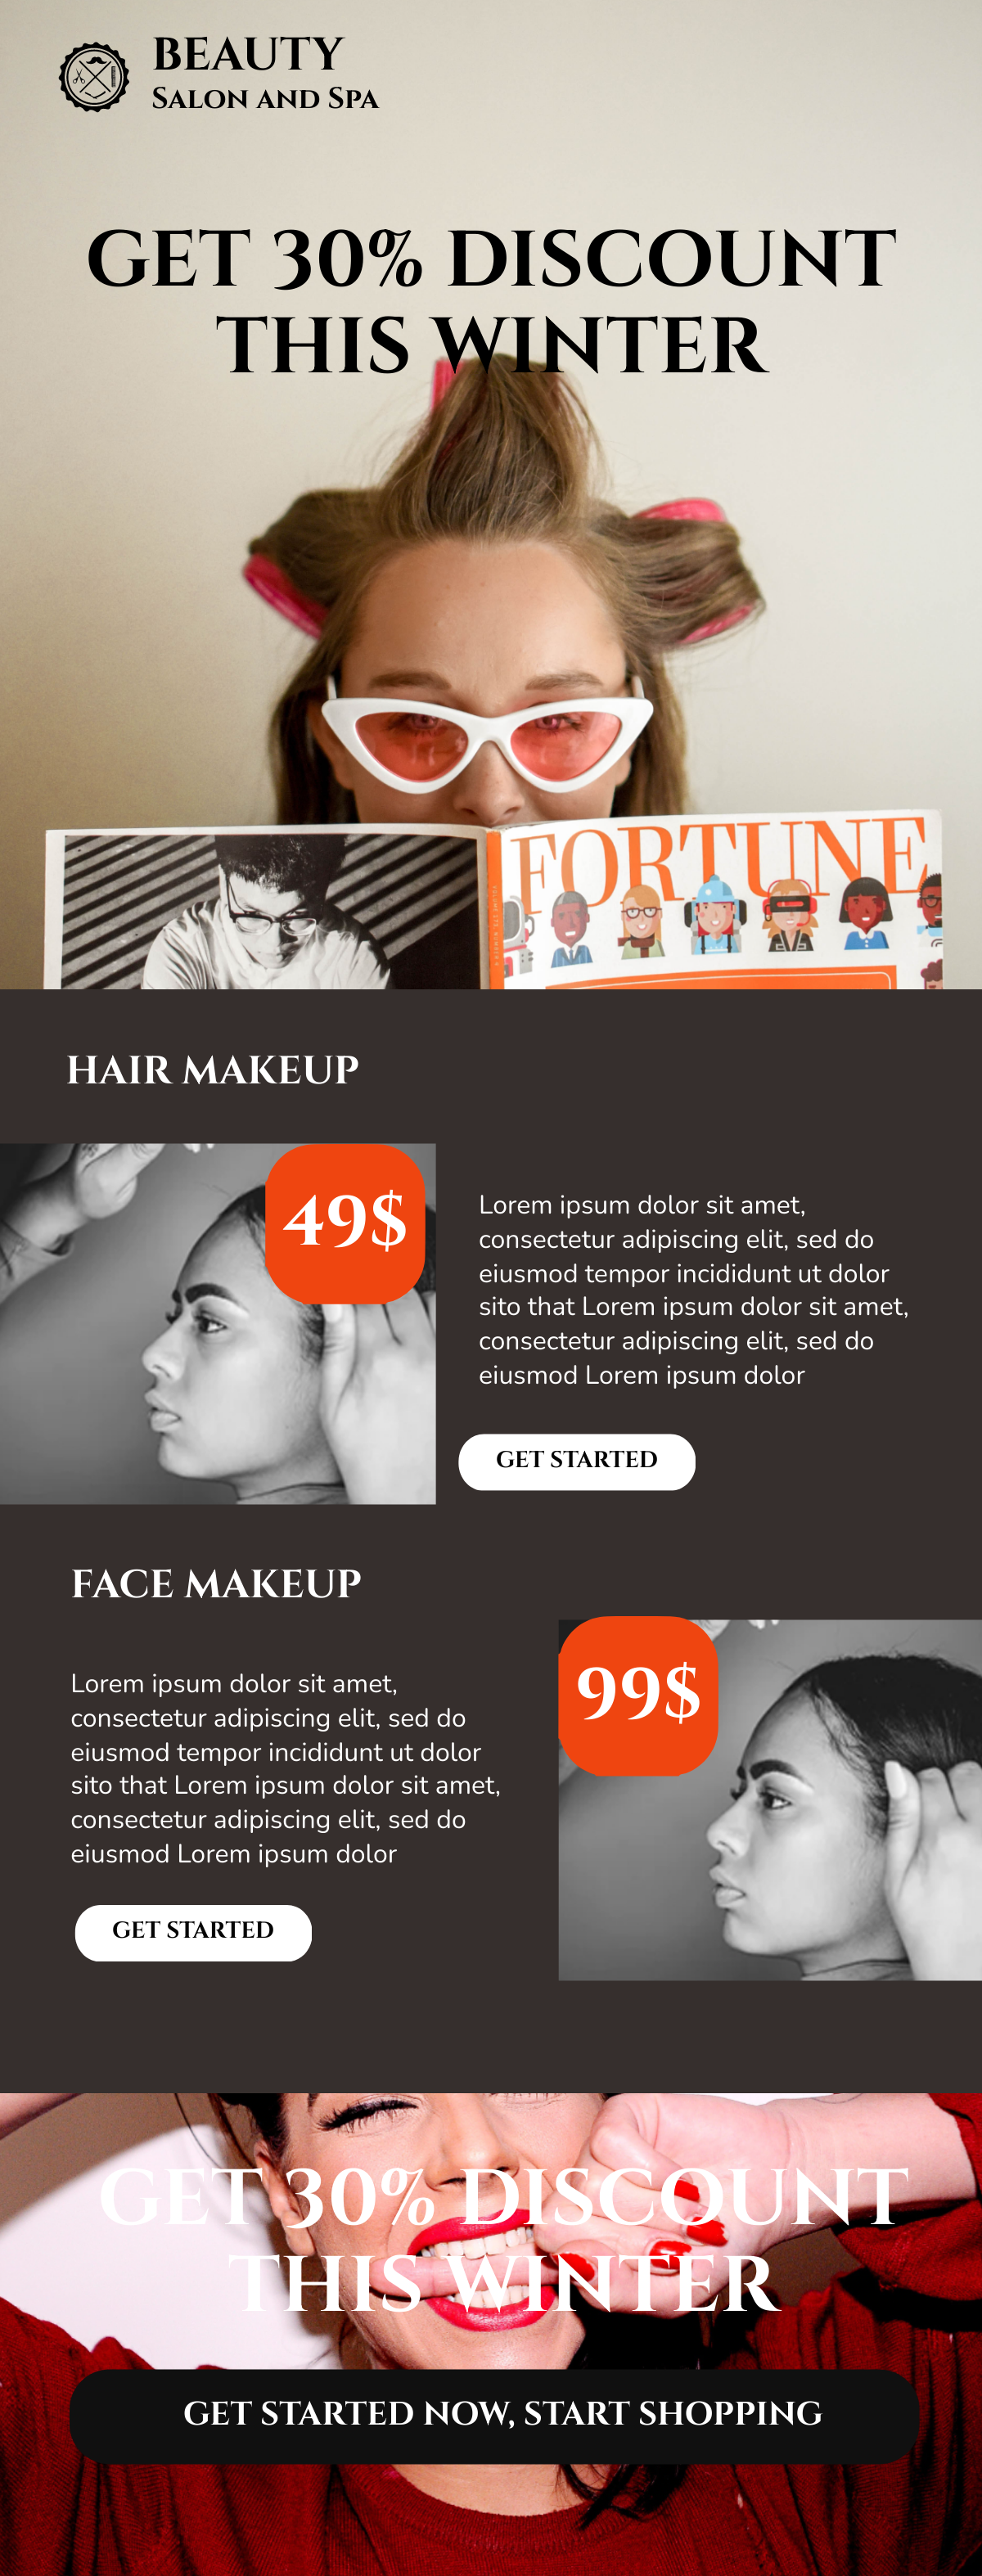 Salon Email Ad Template